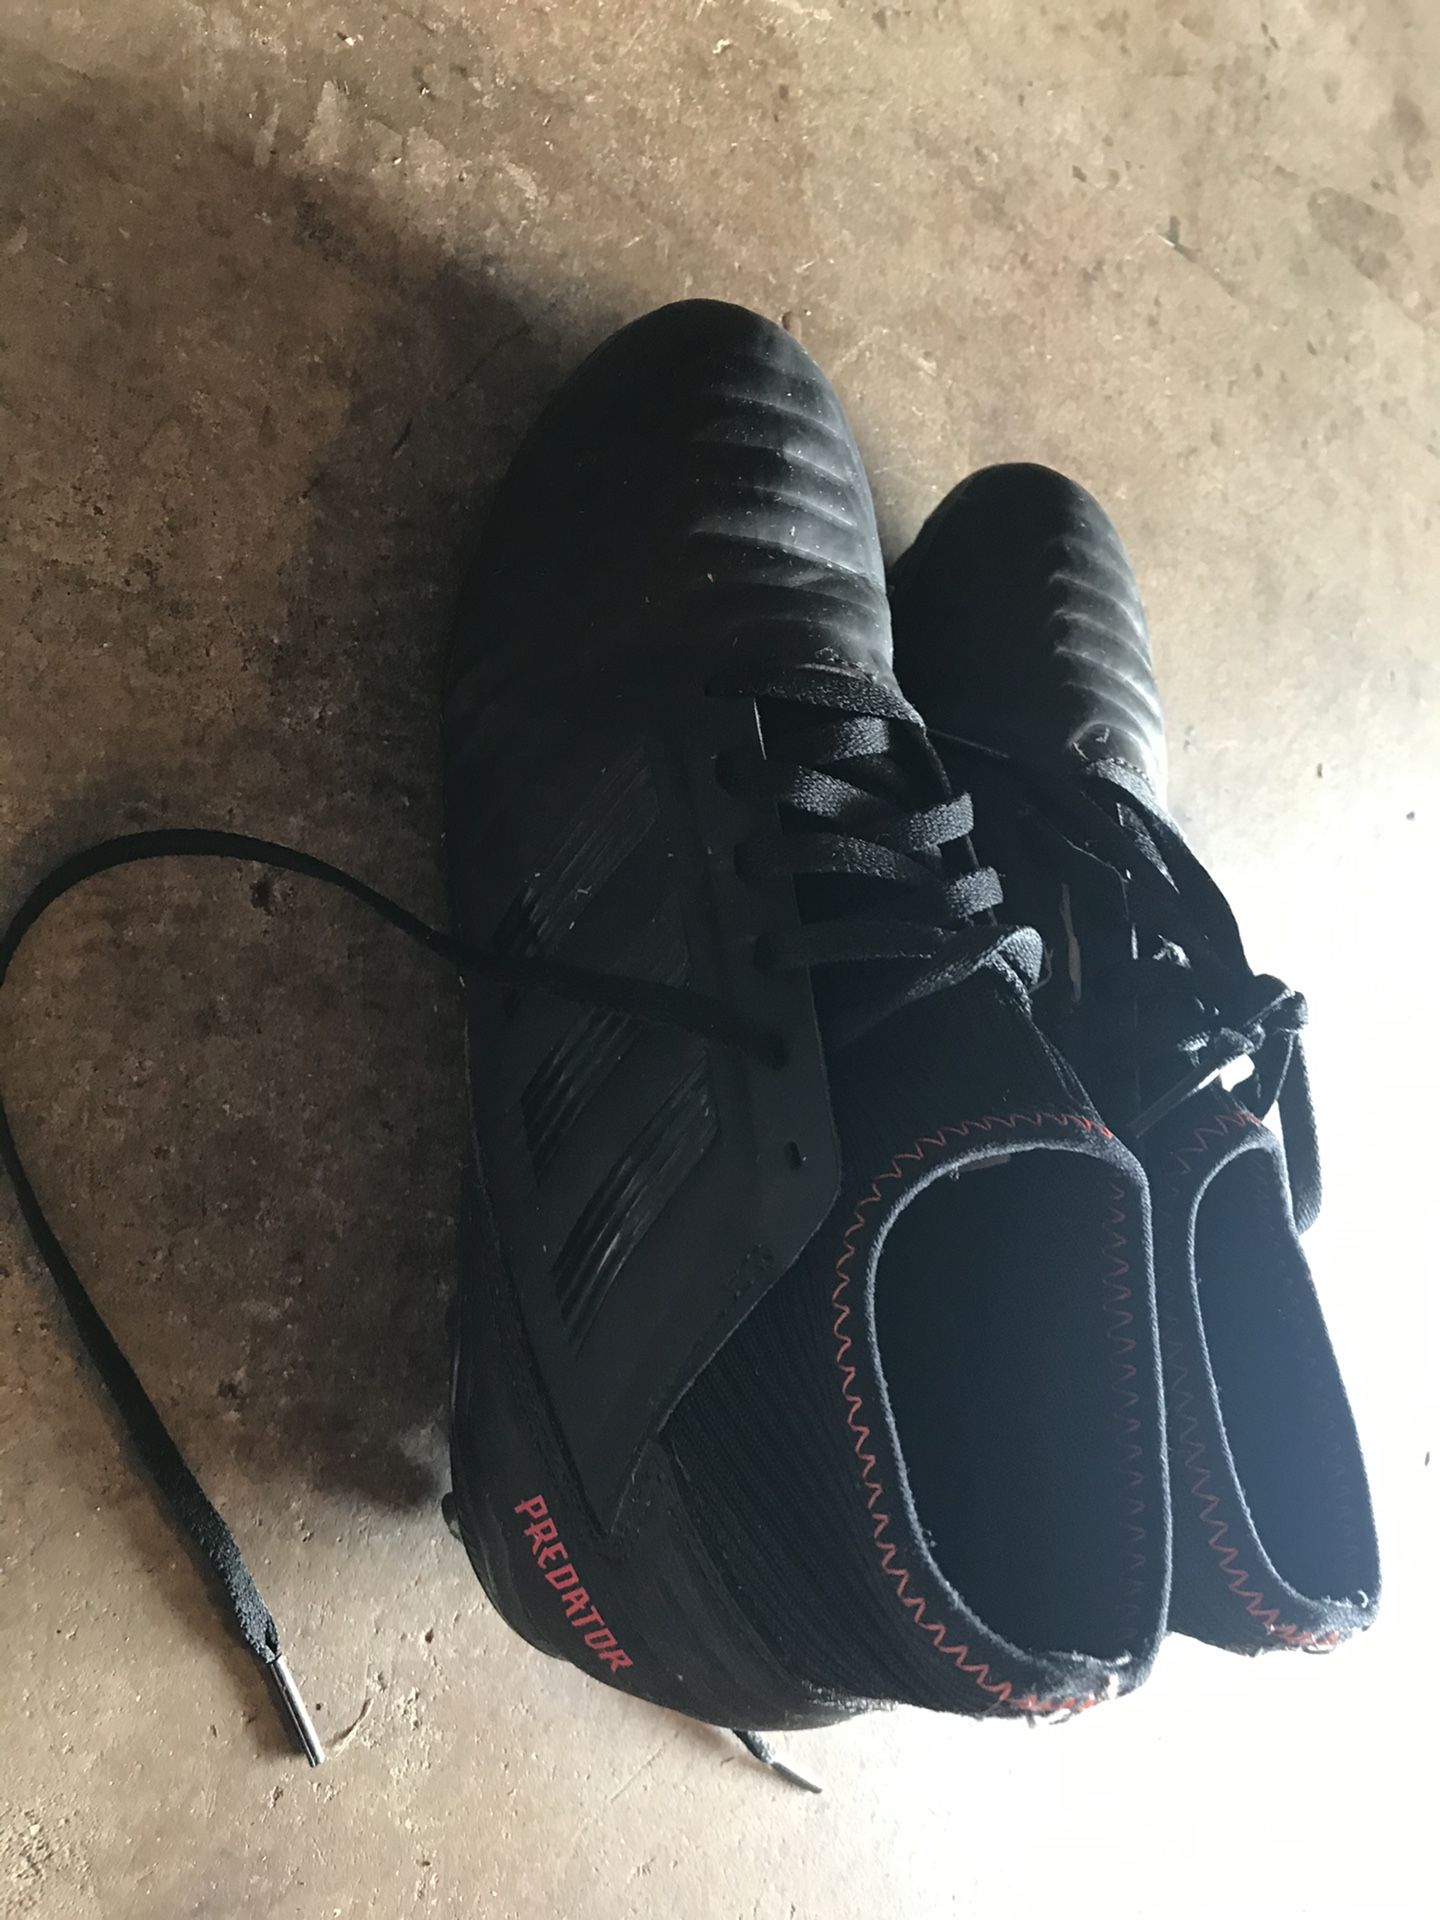 Adidas soccer cleats size 4